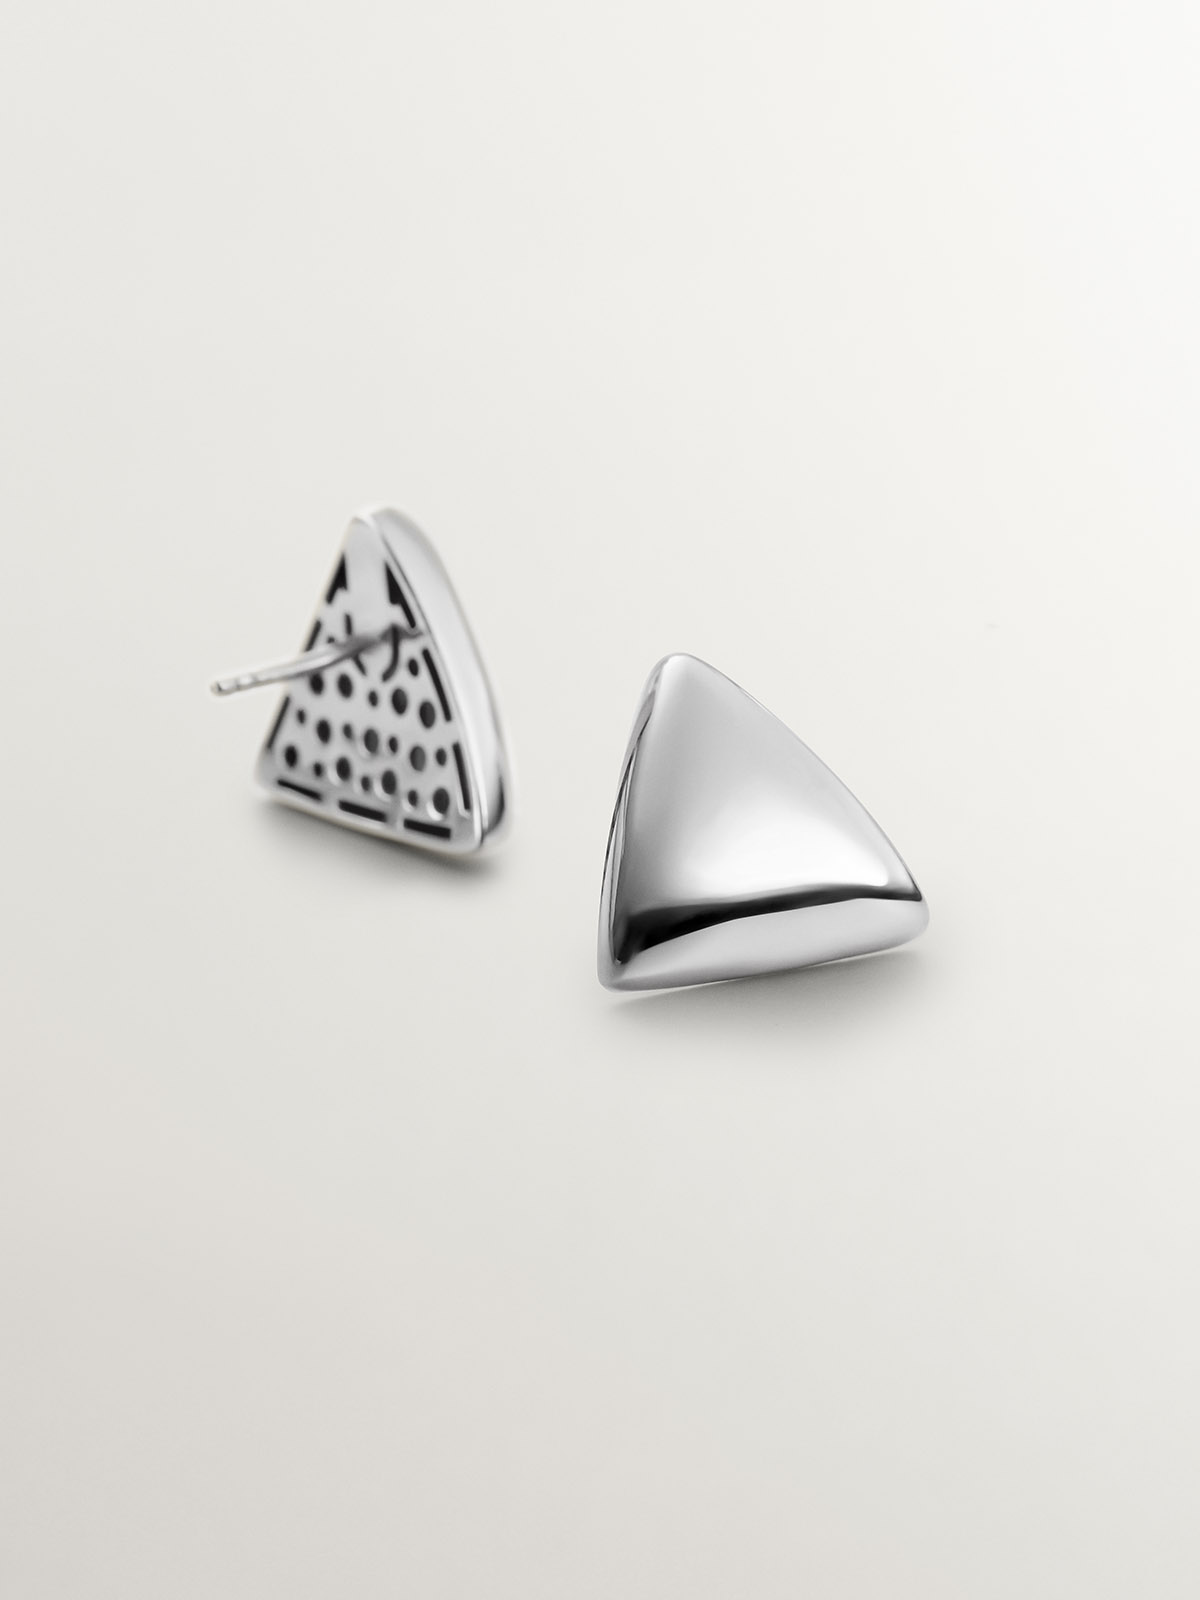 925 silver earrings with triangular shape